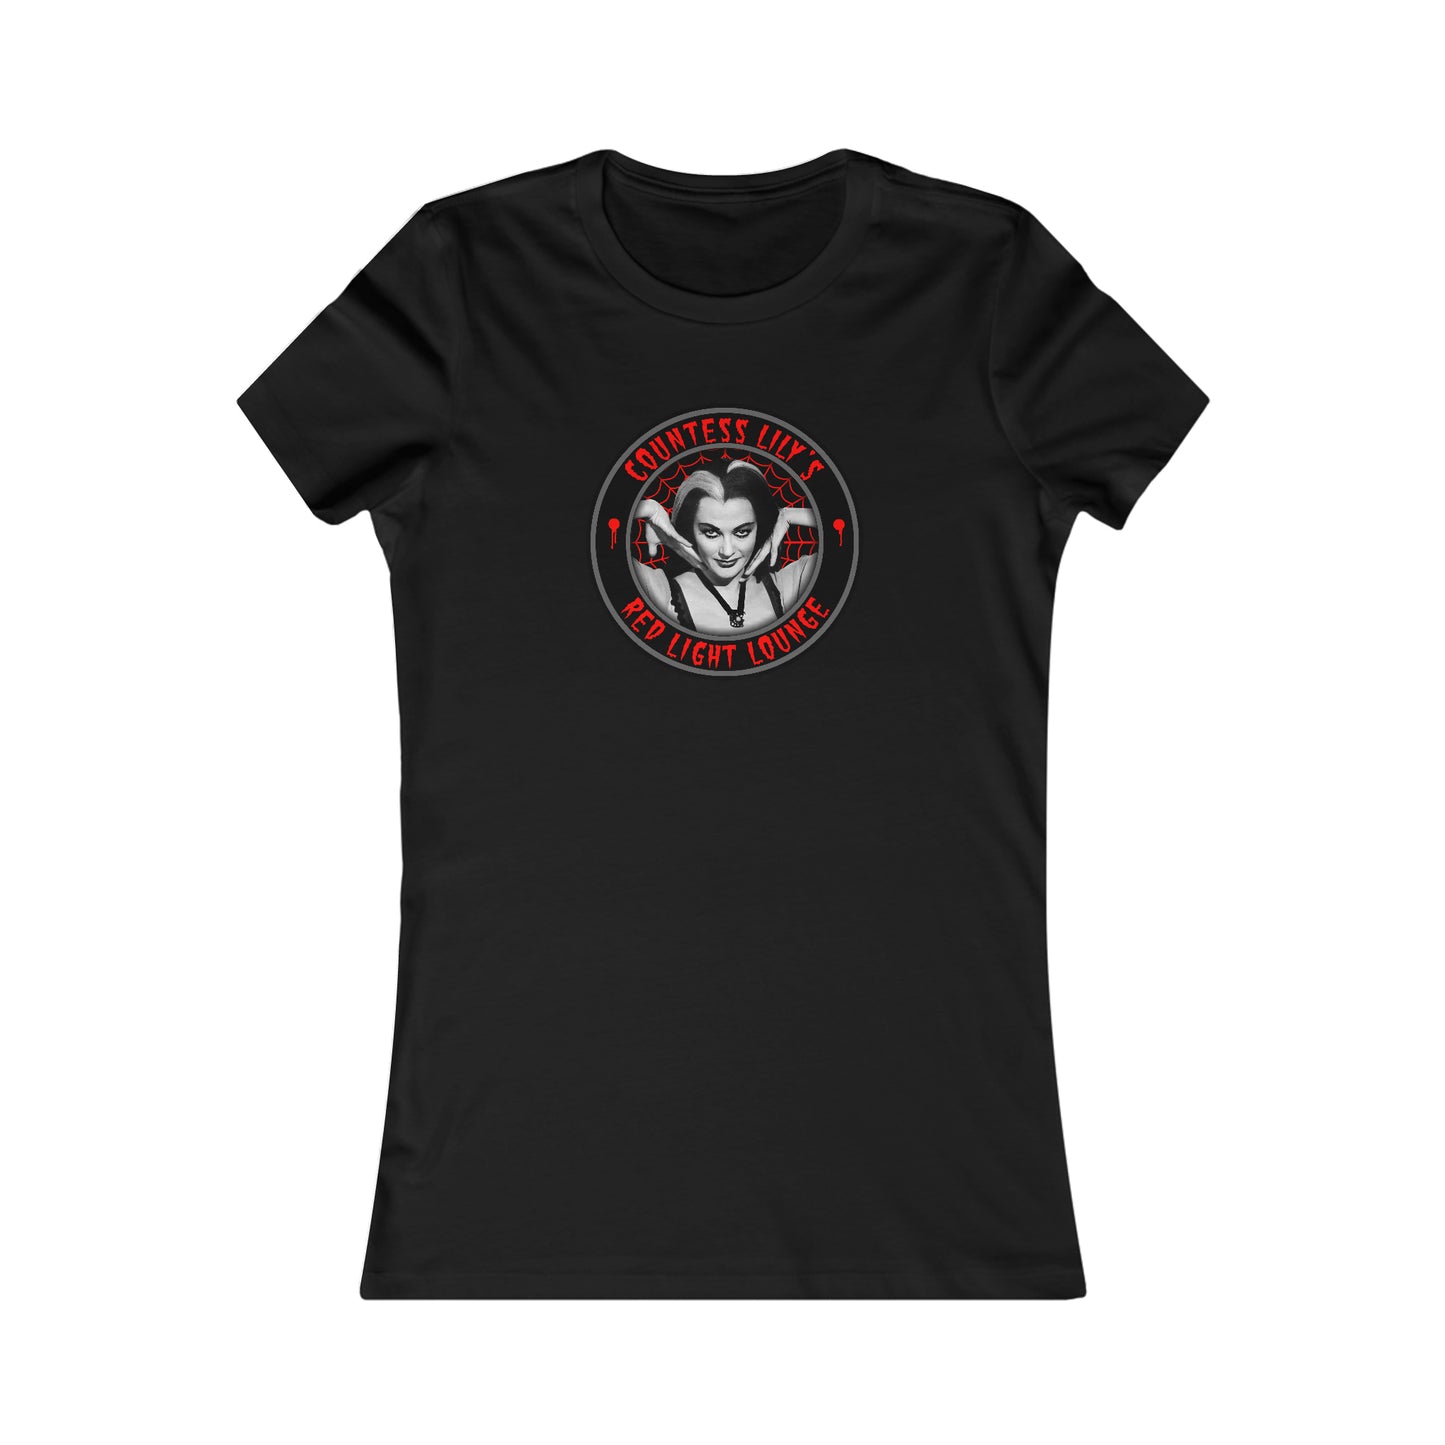 COUNTESS LILY - RED LIGHT LOUNGE Women's Favorite Tee